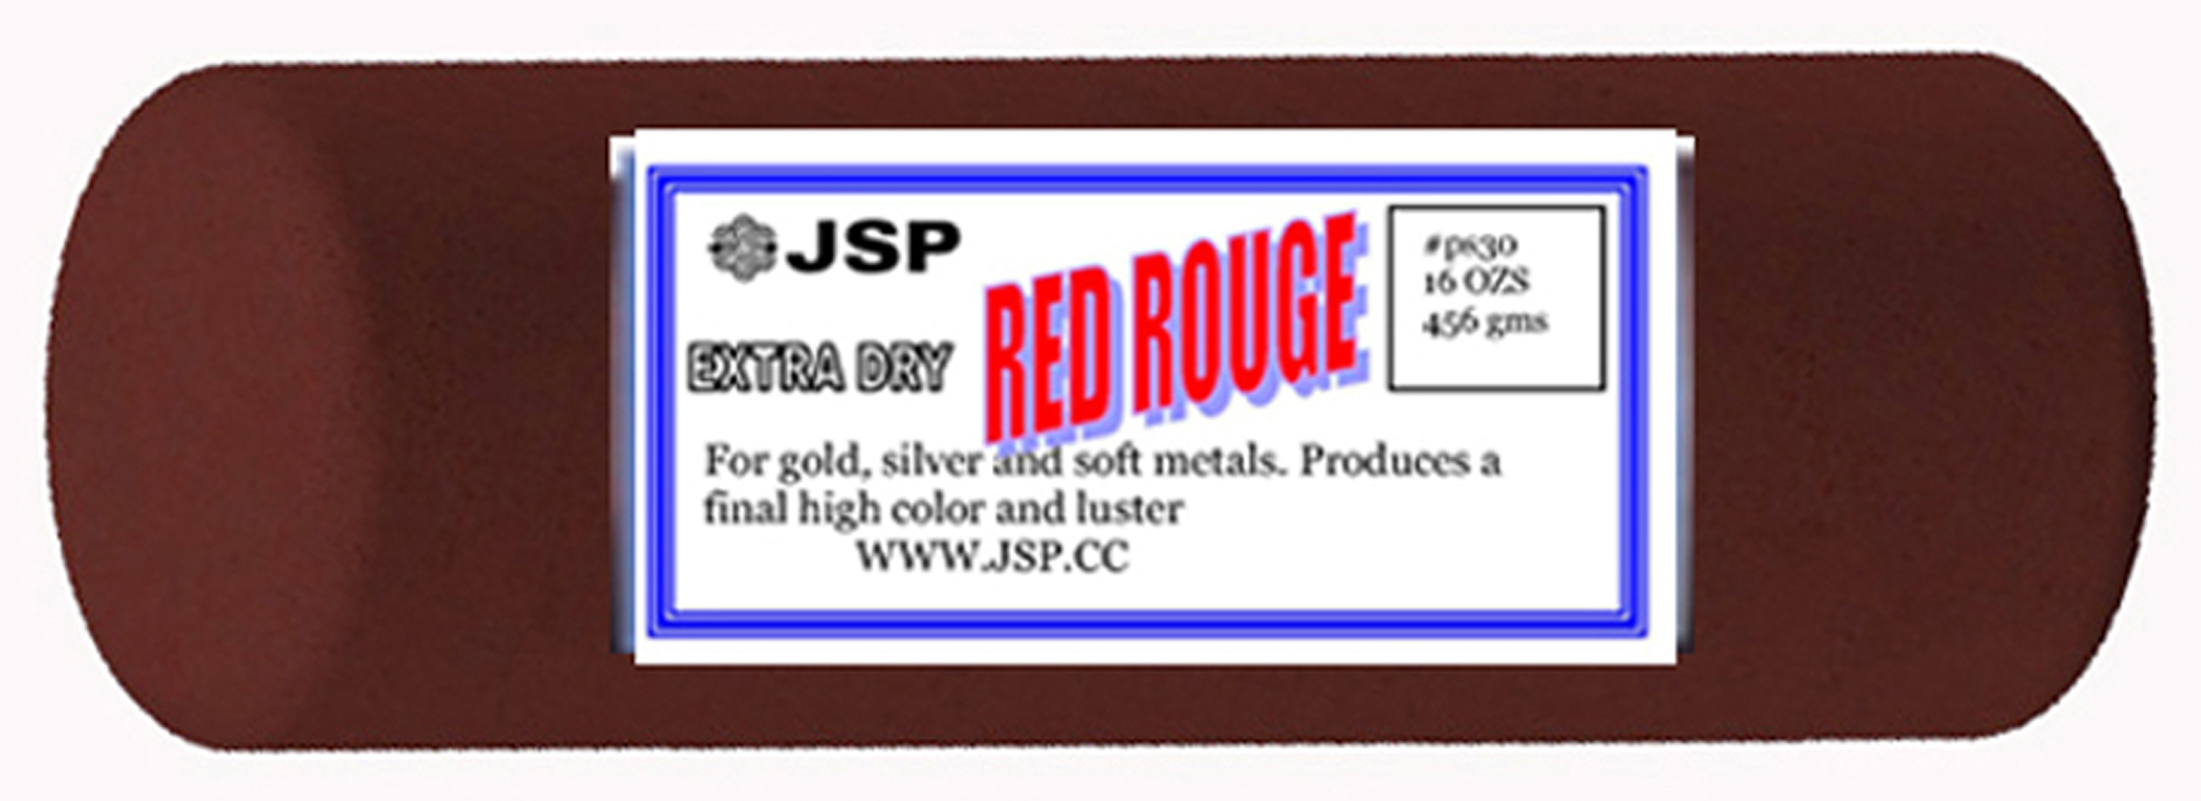 RED ROUGE BAR ROUND 1/4LB